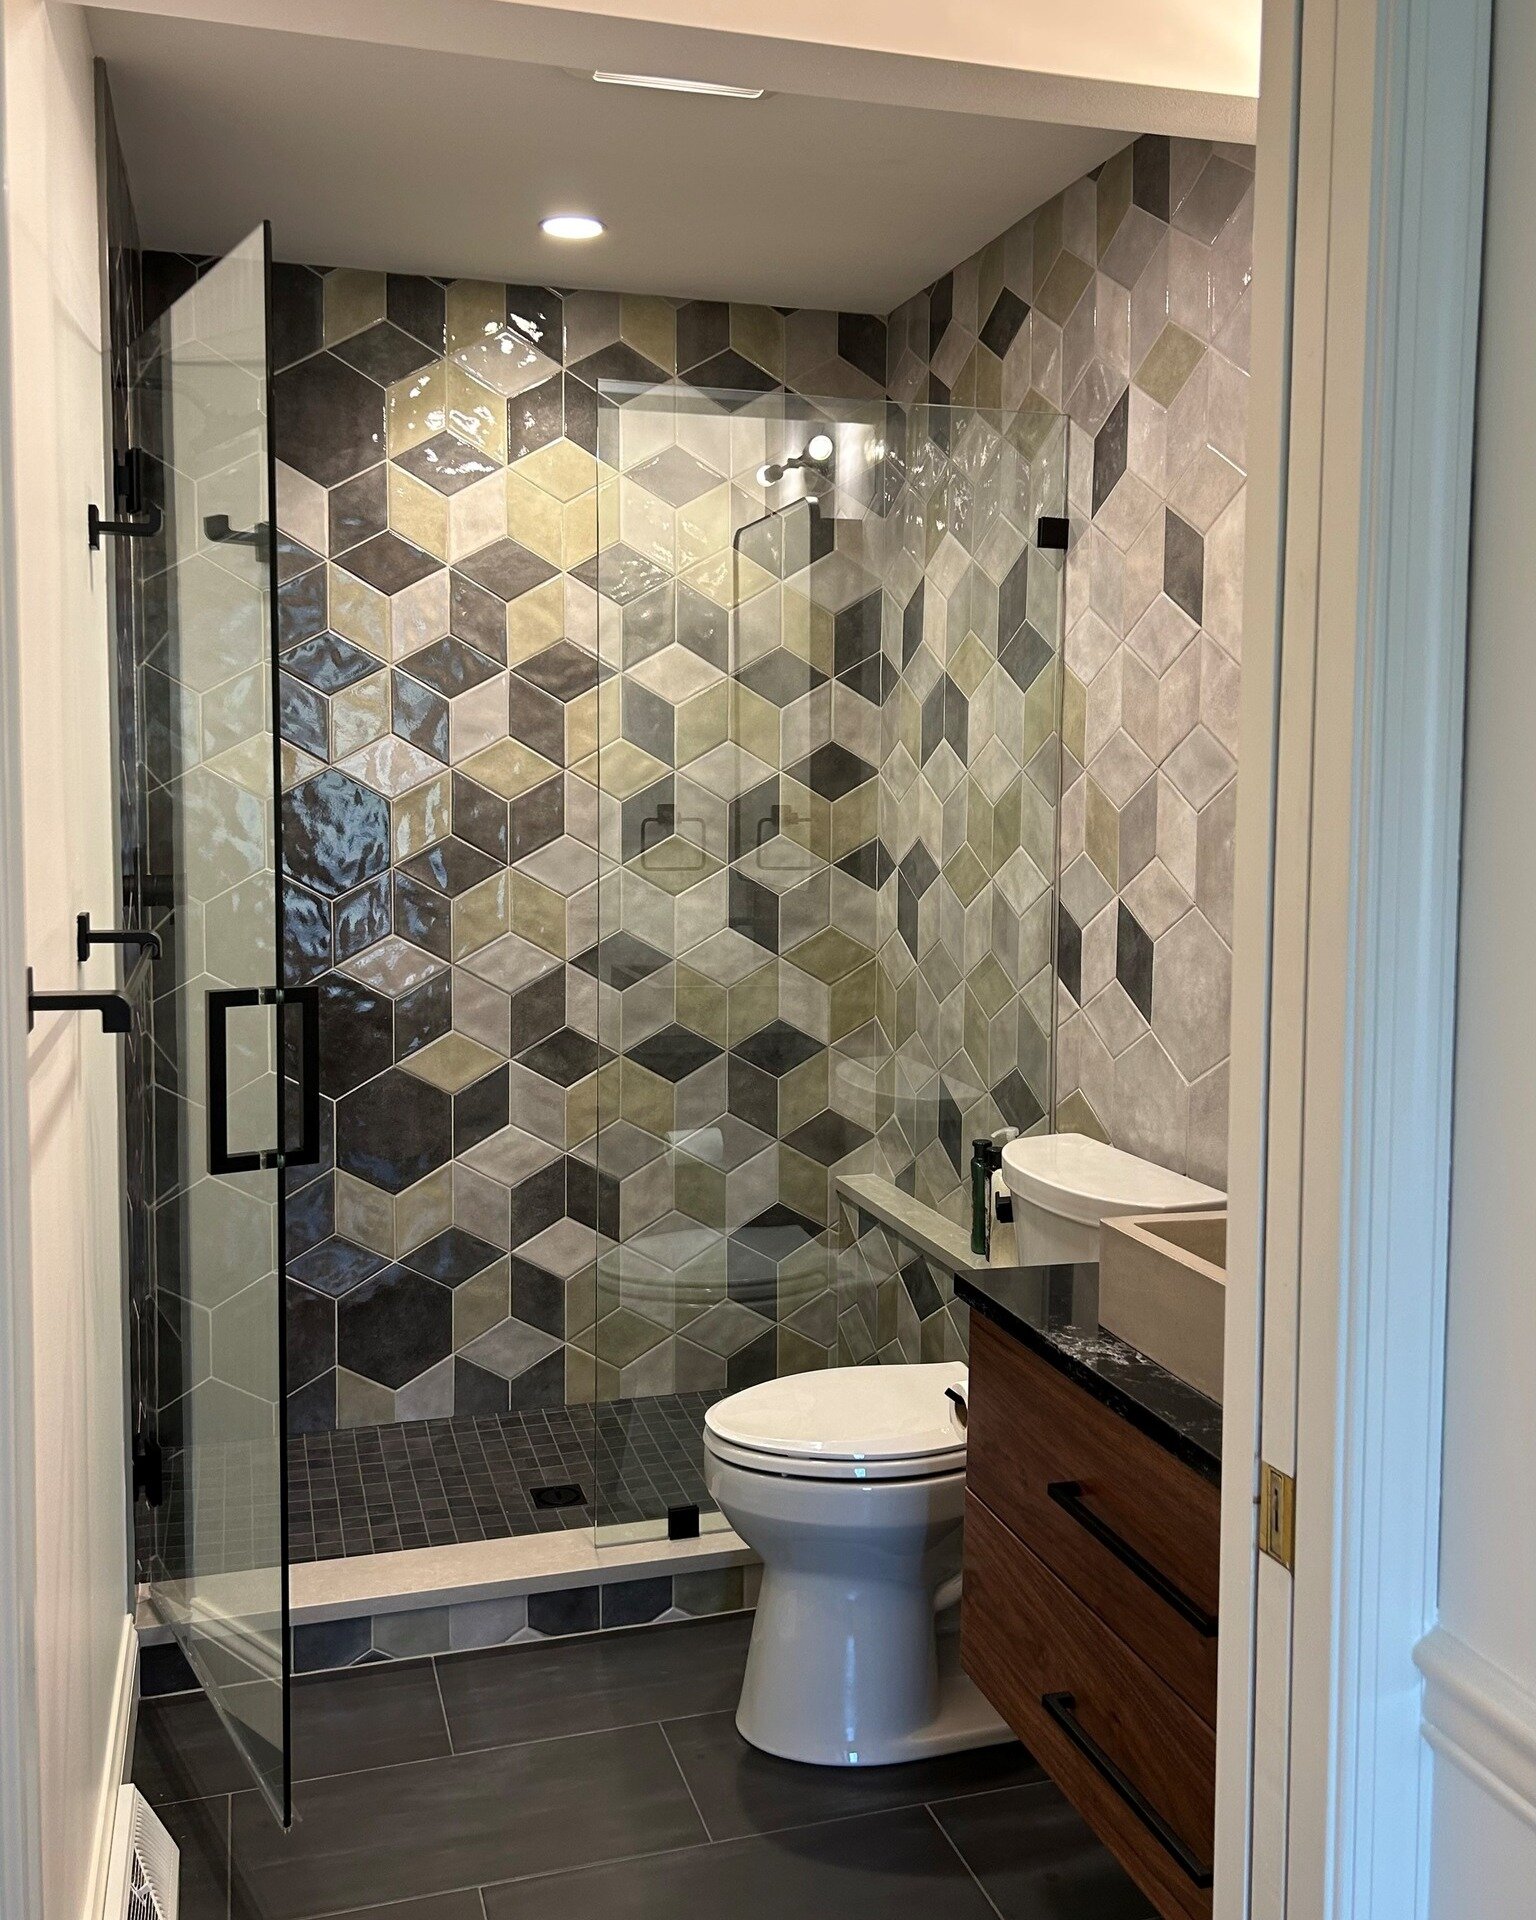 Another bathroom remodel complete! This client wanted something a little more edgy with a masculine feel.  A bold design blended with muted greens and neutral colors helps to make the space feel unique yet timeless. 

 #capstonedesignbuild #lancaster